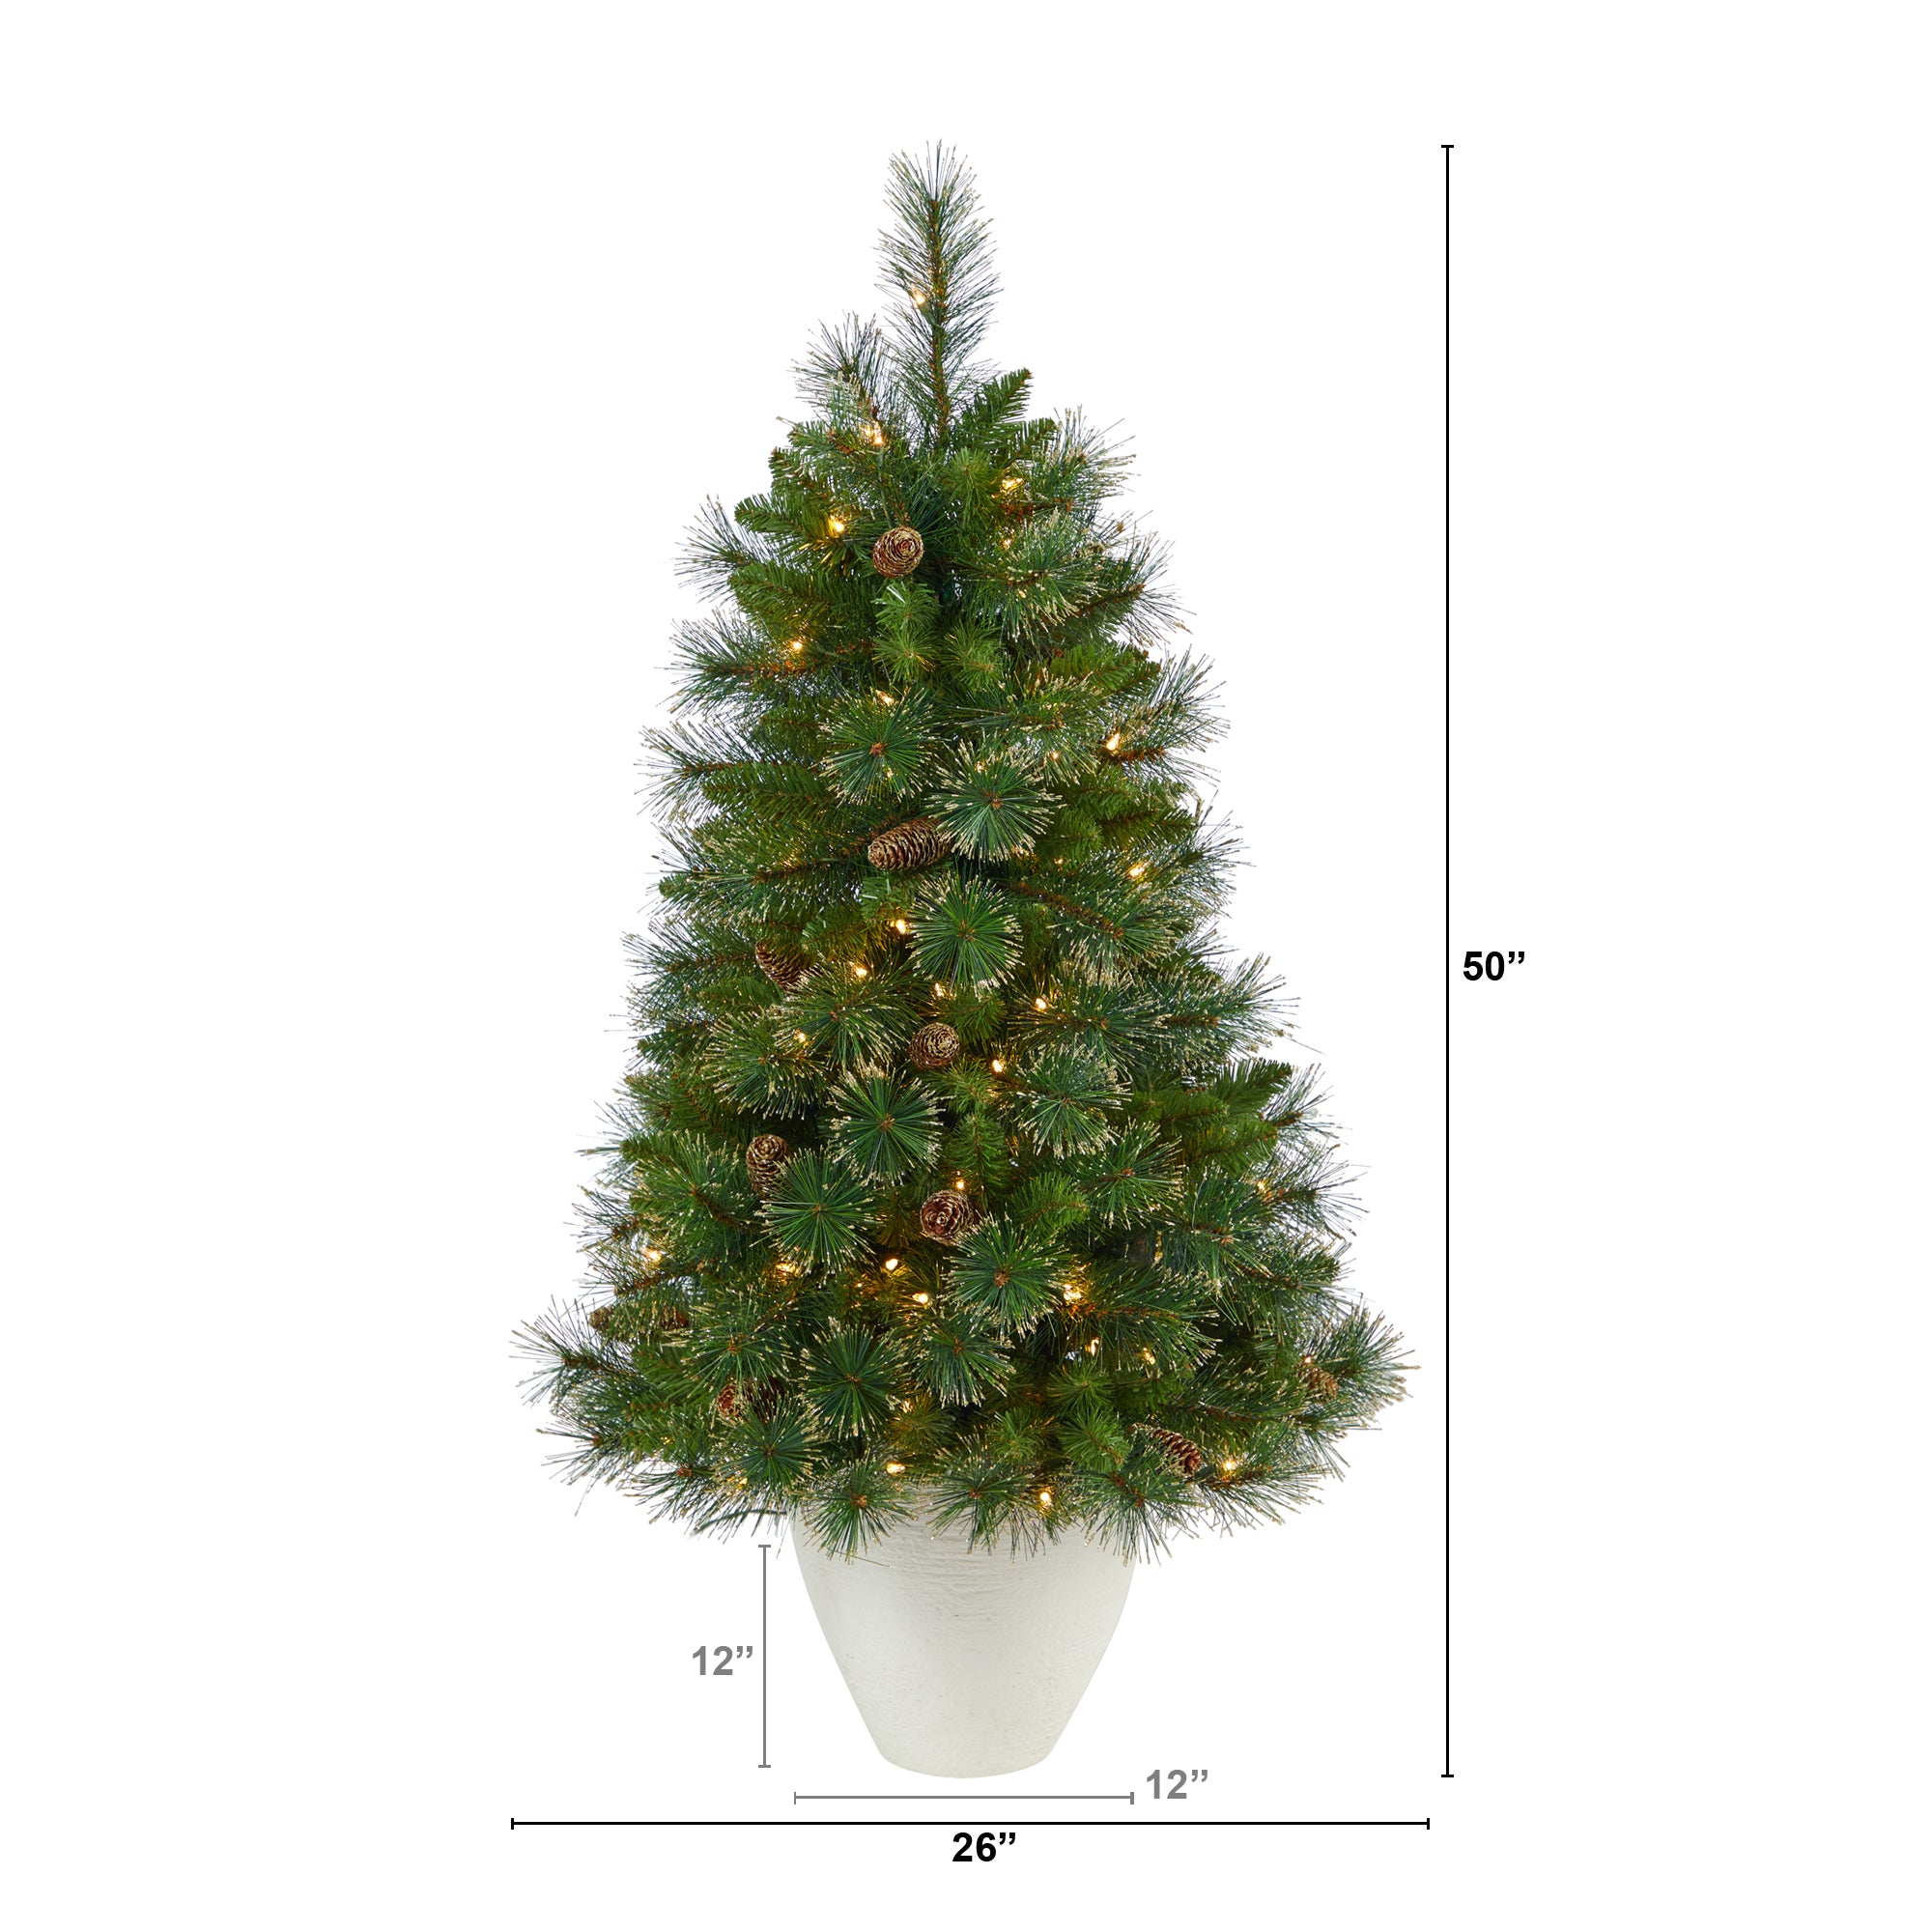 50"� Golden Tip Washington Pine Artificial Christmas Tree with 100 Clear Lights, Pine Cones and 336 Bendable Branches in White Planter